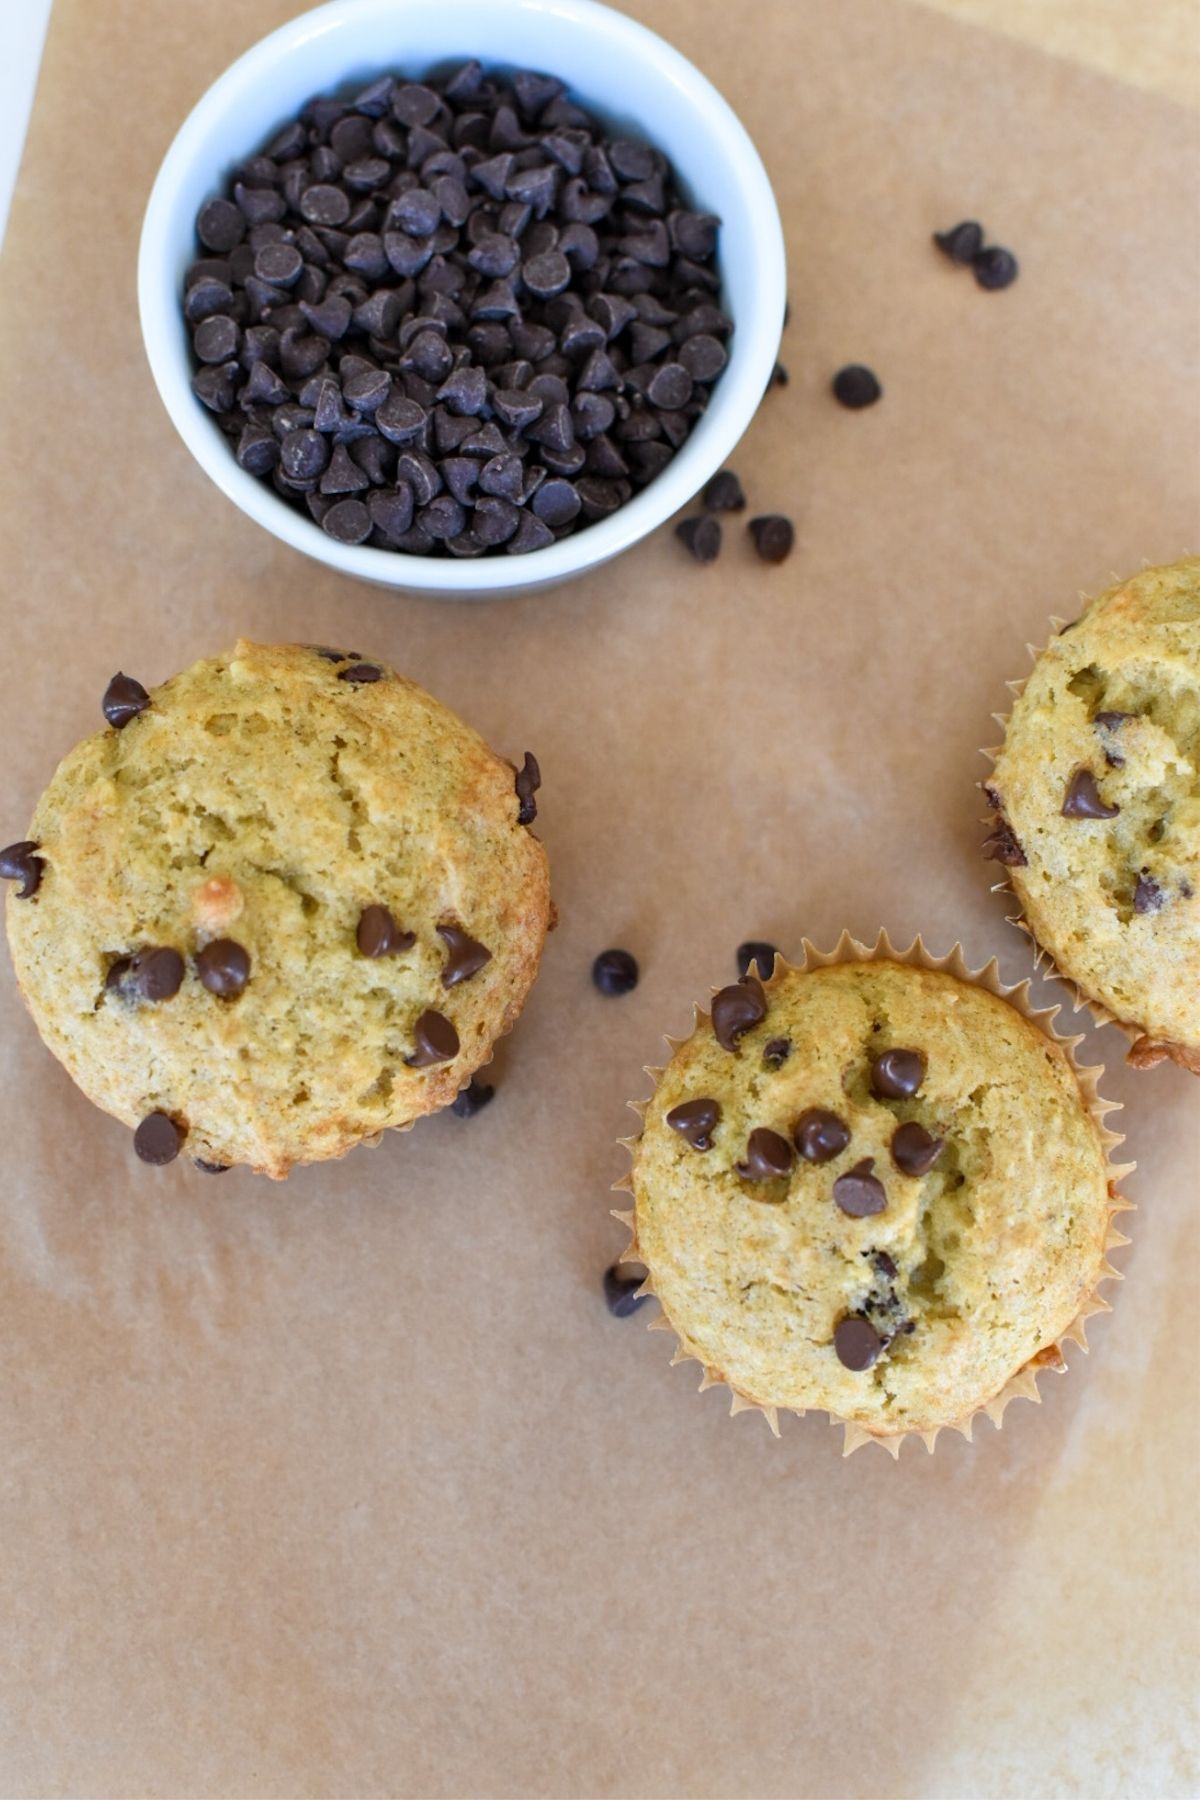 Three banana chocolate chip muffins with a small dish of mini chocolate chips in it.